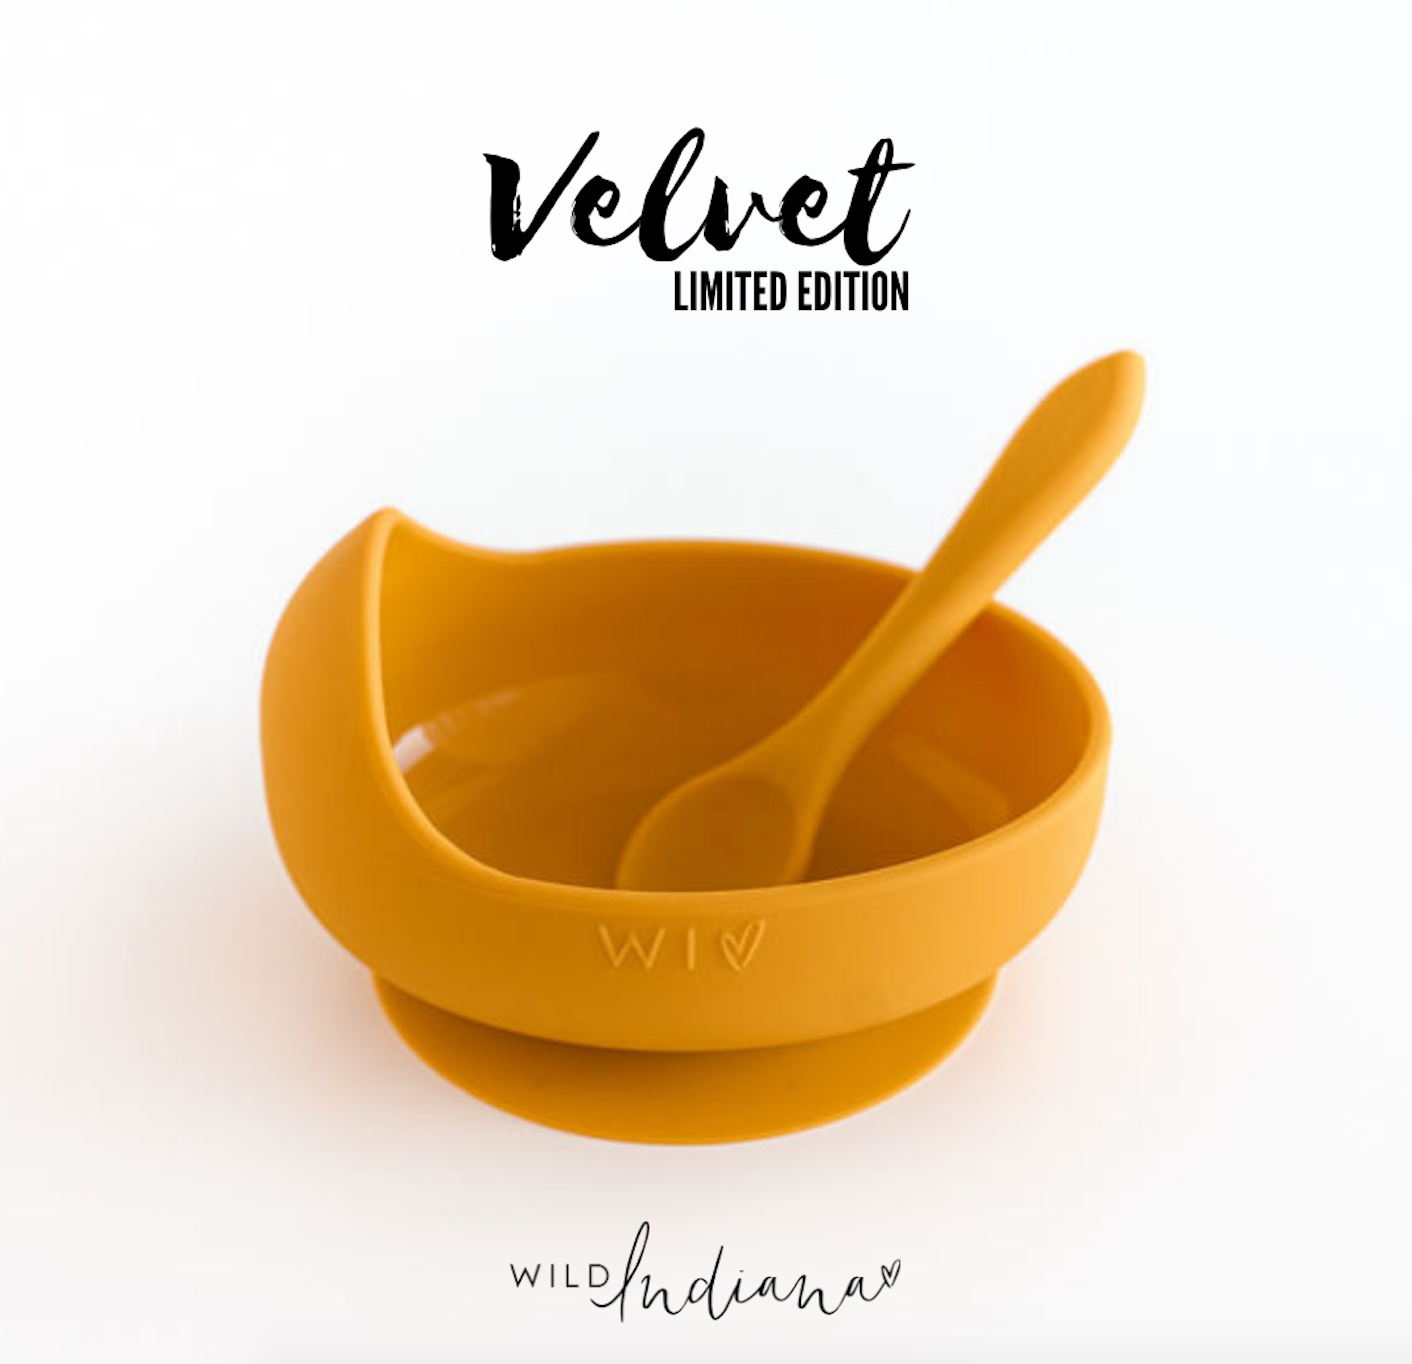 WILD INDIANA - Winter LIMITED EDITION Silicone Bowl Set | Marigold